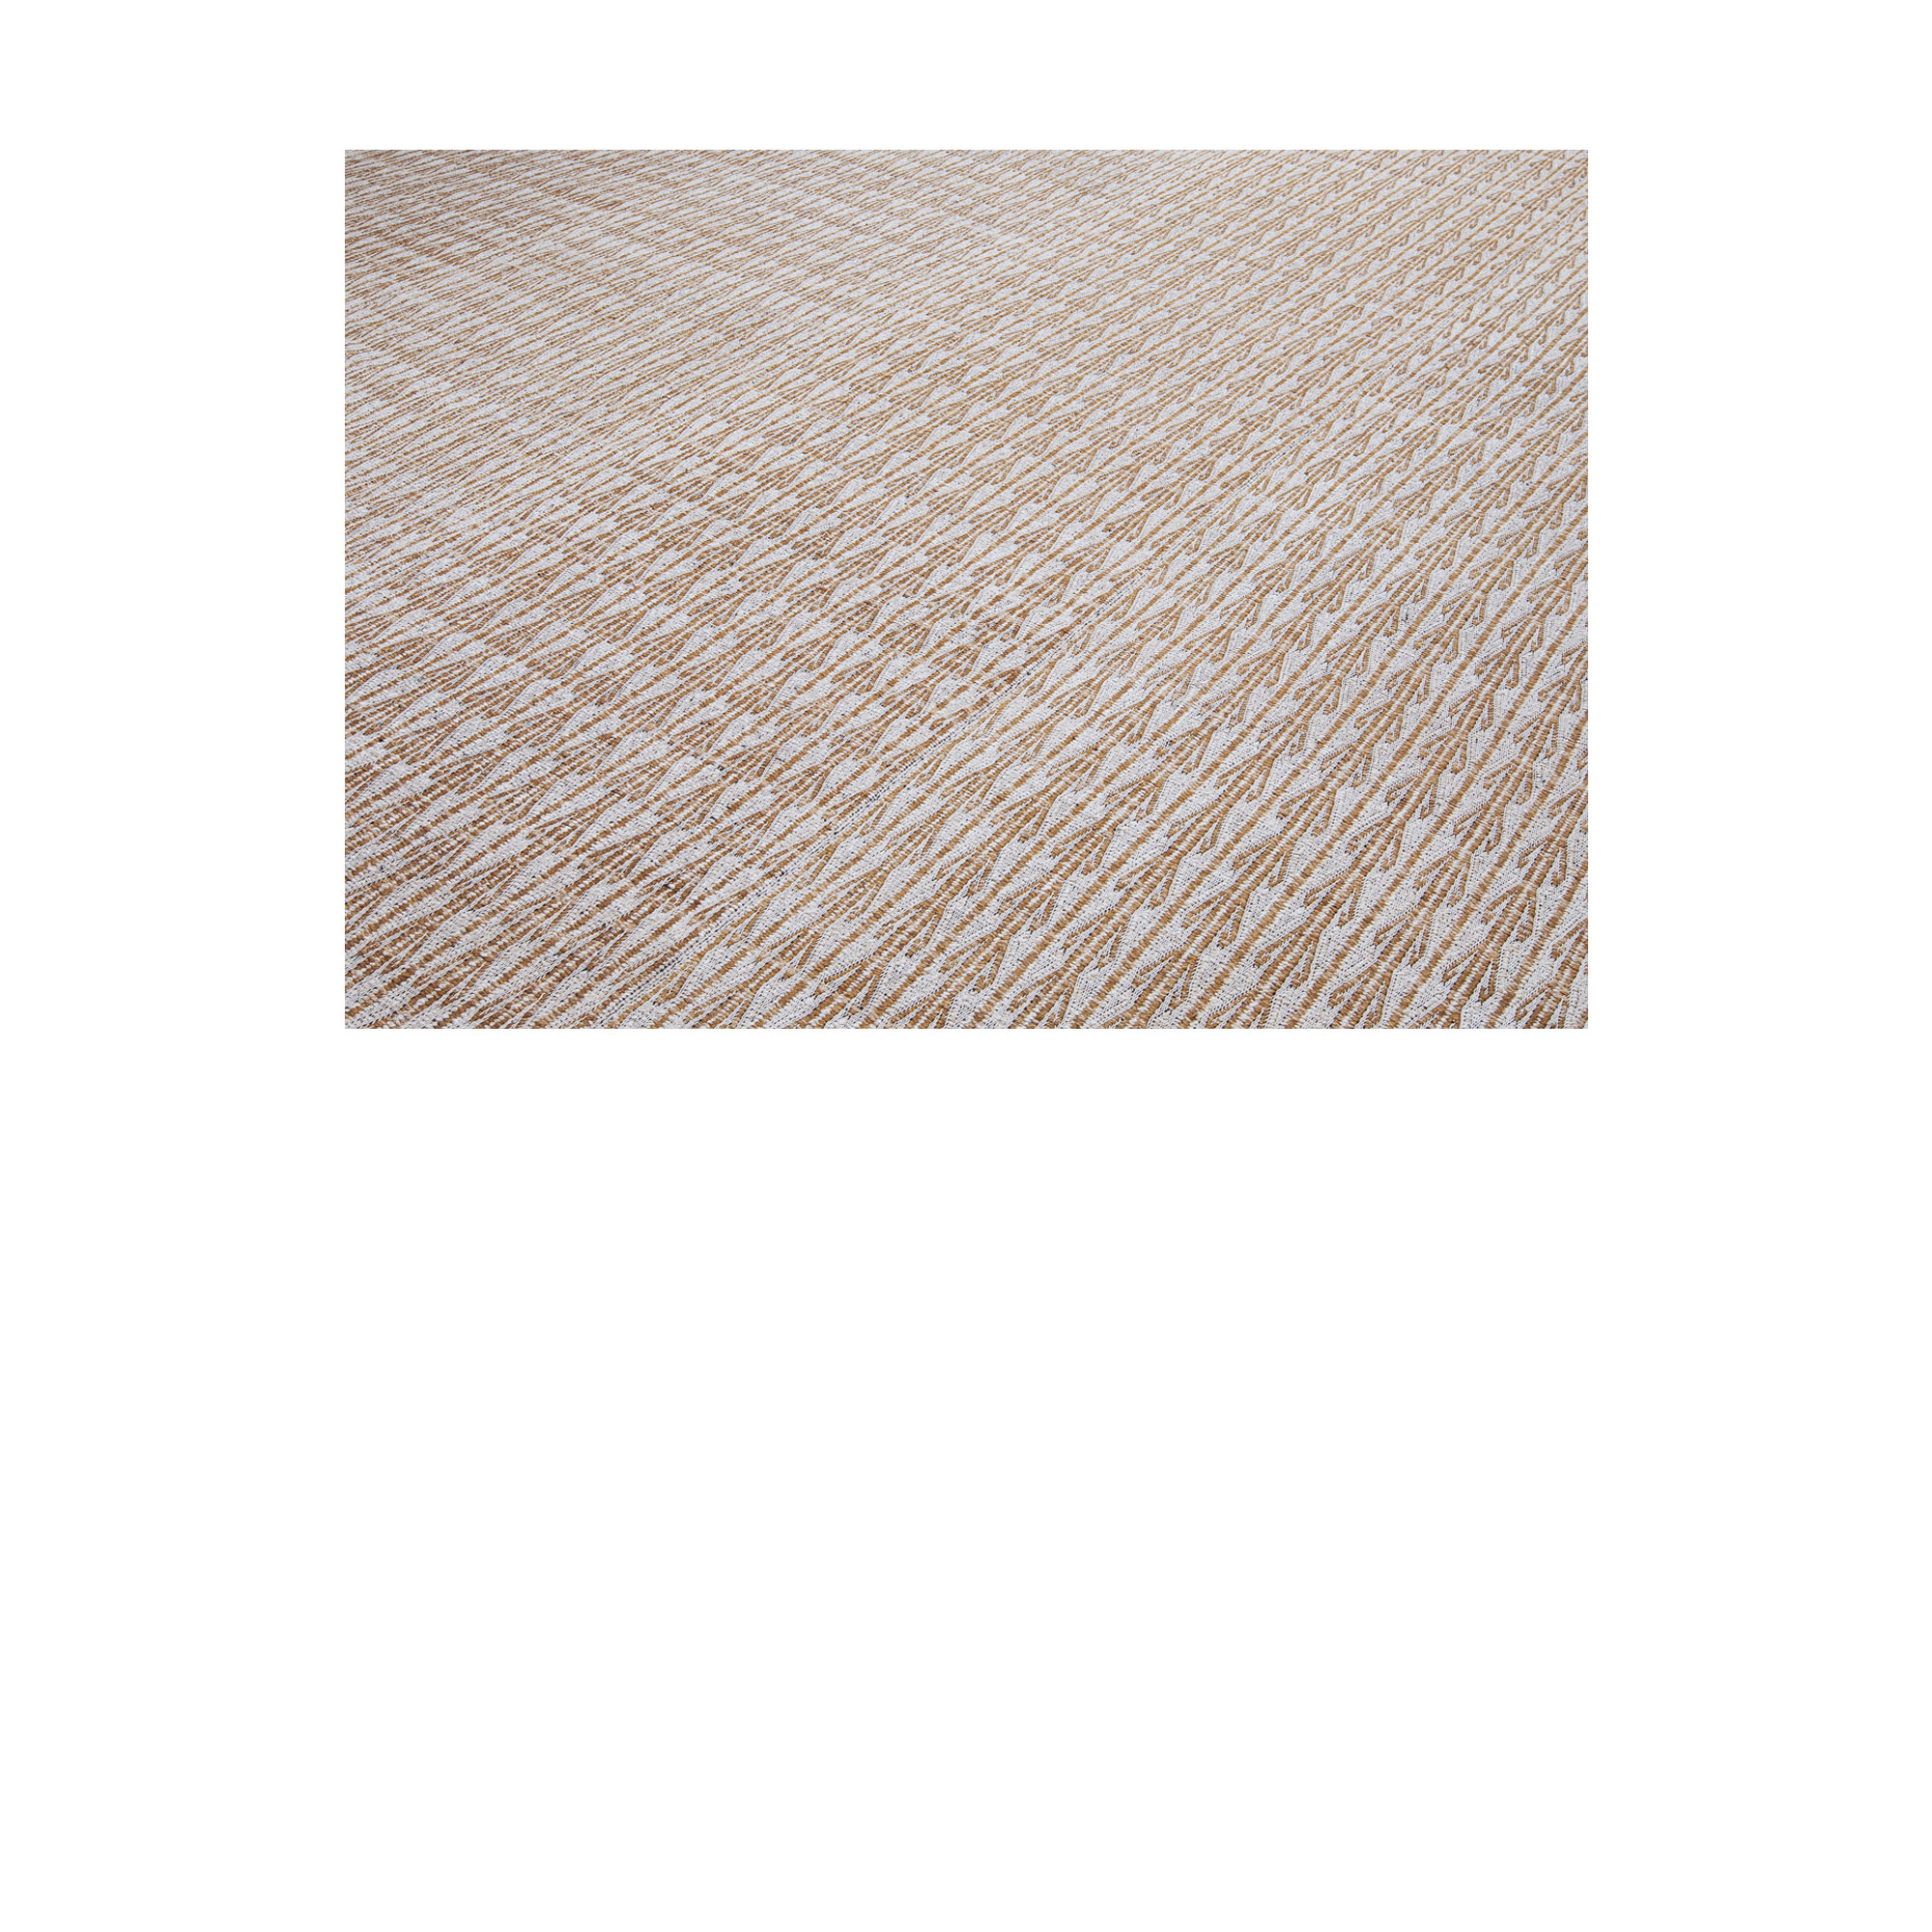 Ricci flatweave made from 100% naturally dyed Persian wool. Inspired by vintage kilims. 